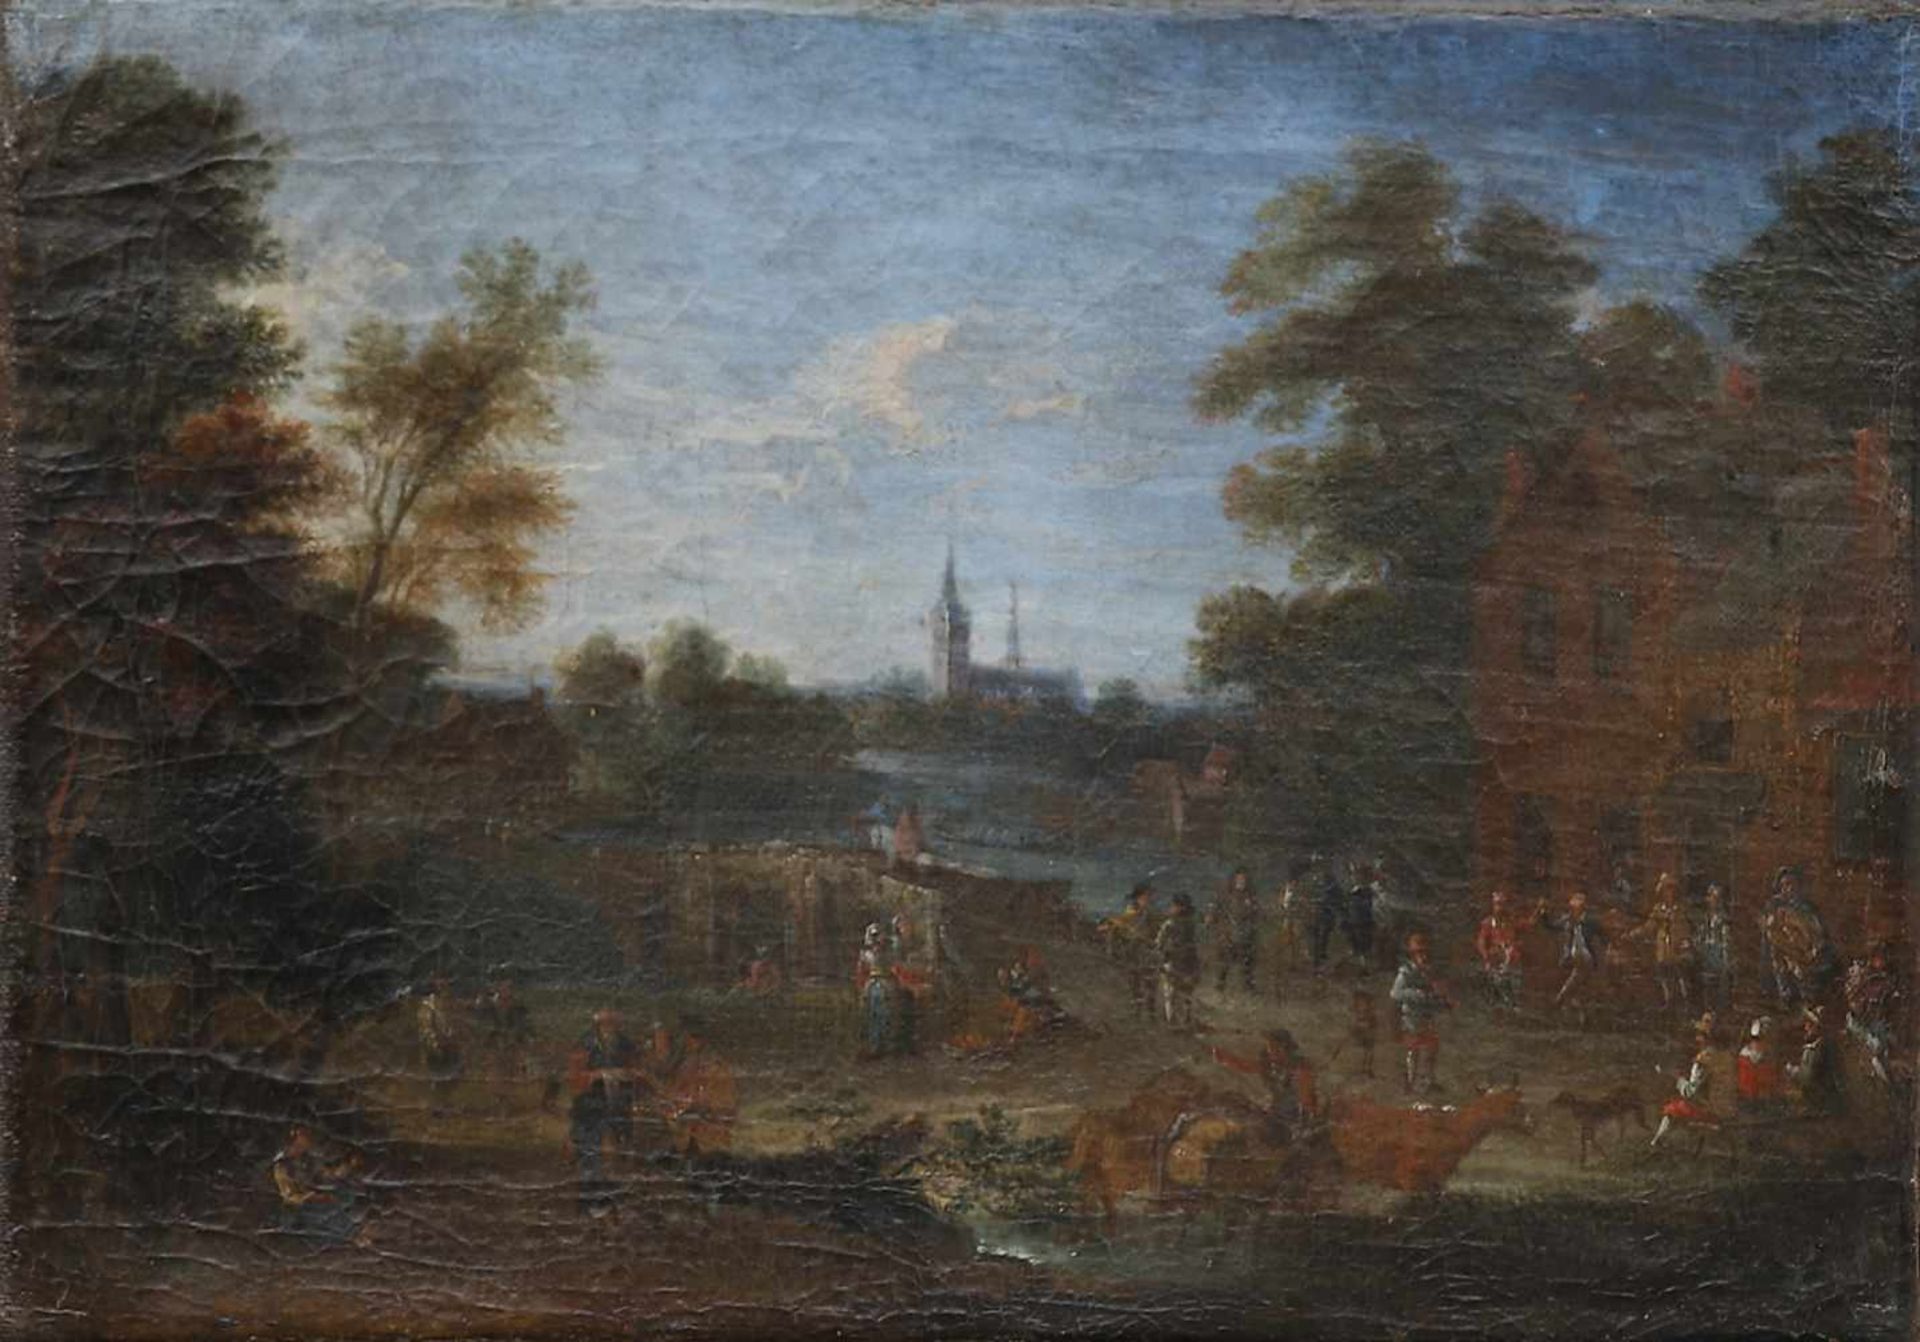 MATHYS SCHOEVAERDTS (BRUSSLES 1665 OR 1667 - AFTER 1702). Attributed to. Landscape.Oil on canvas